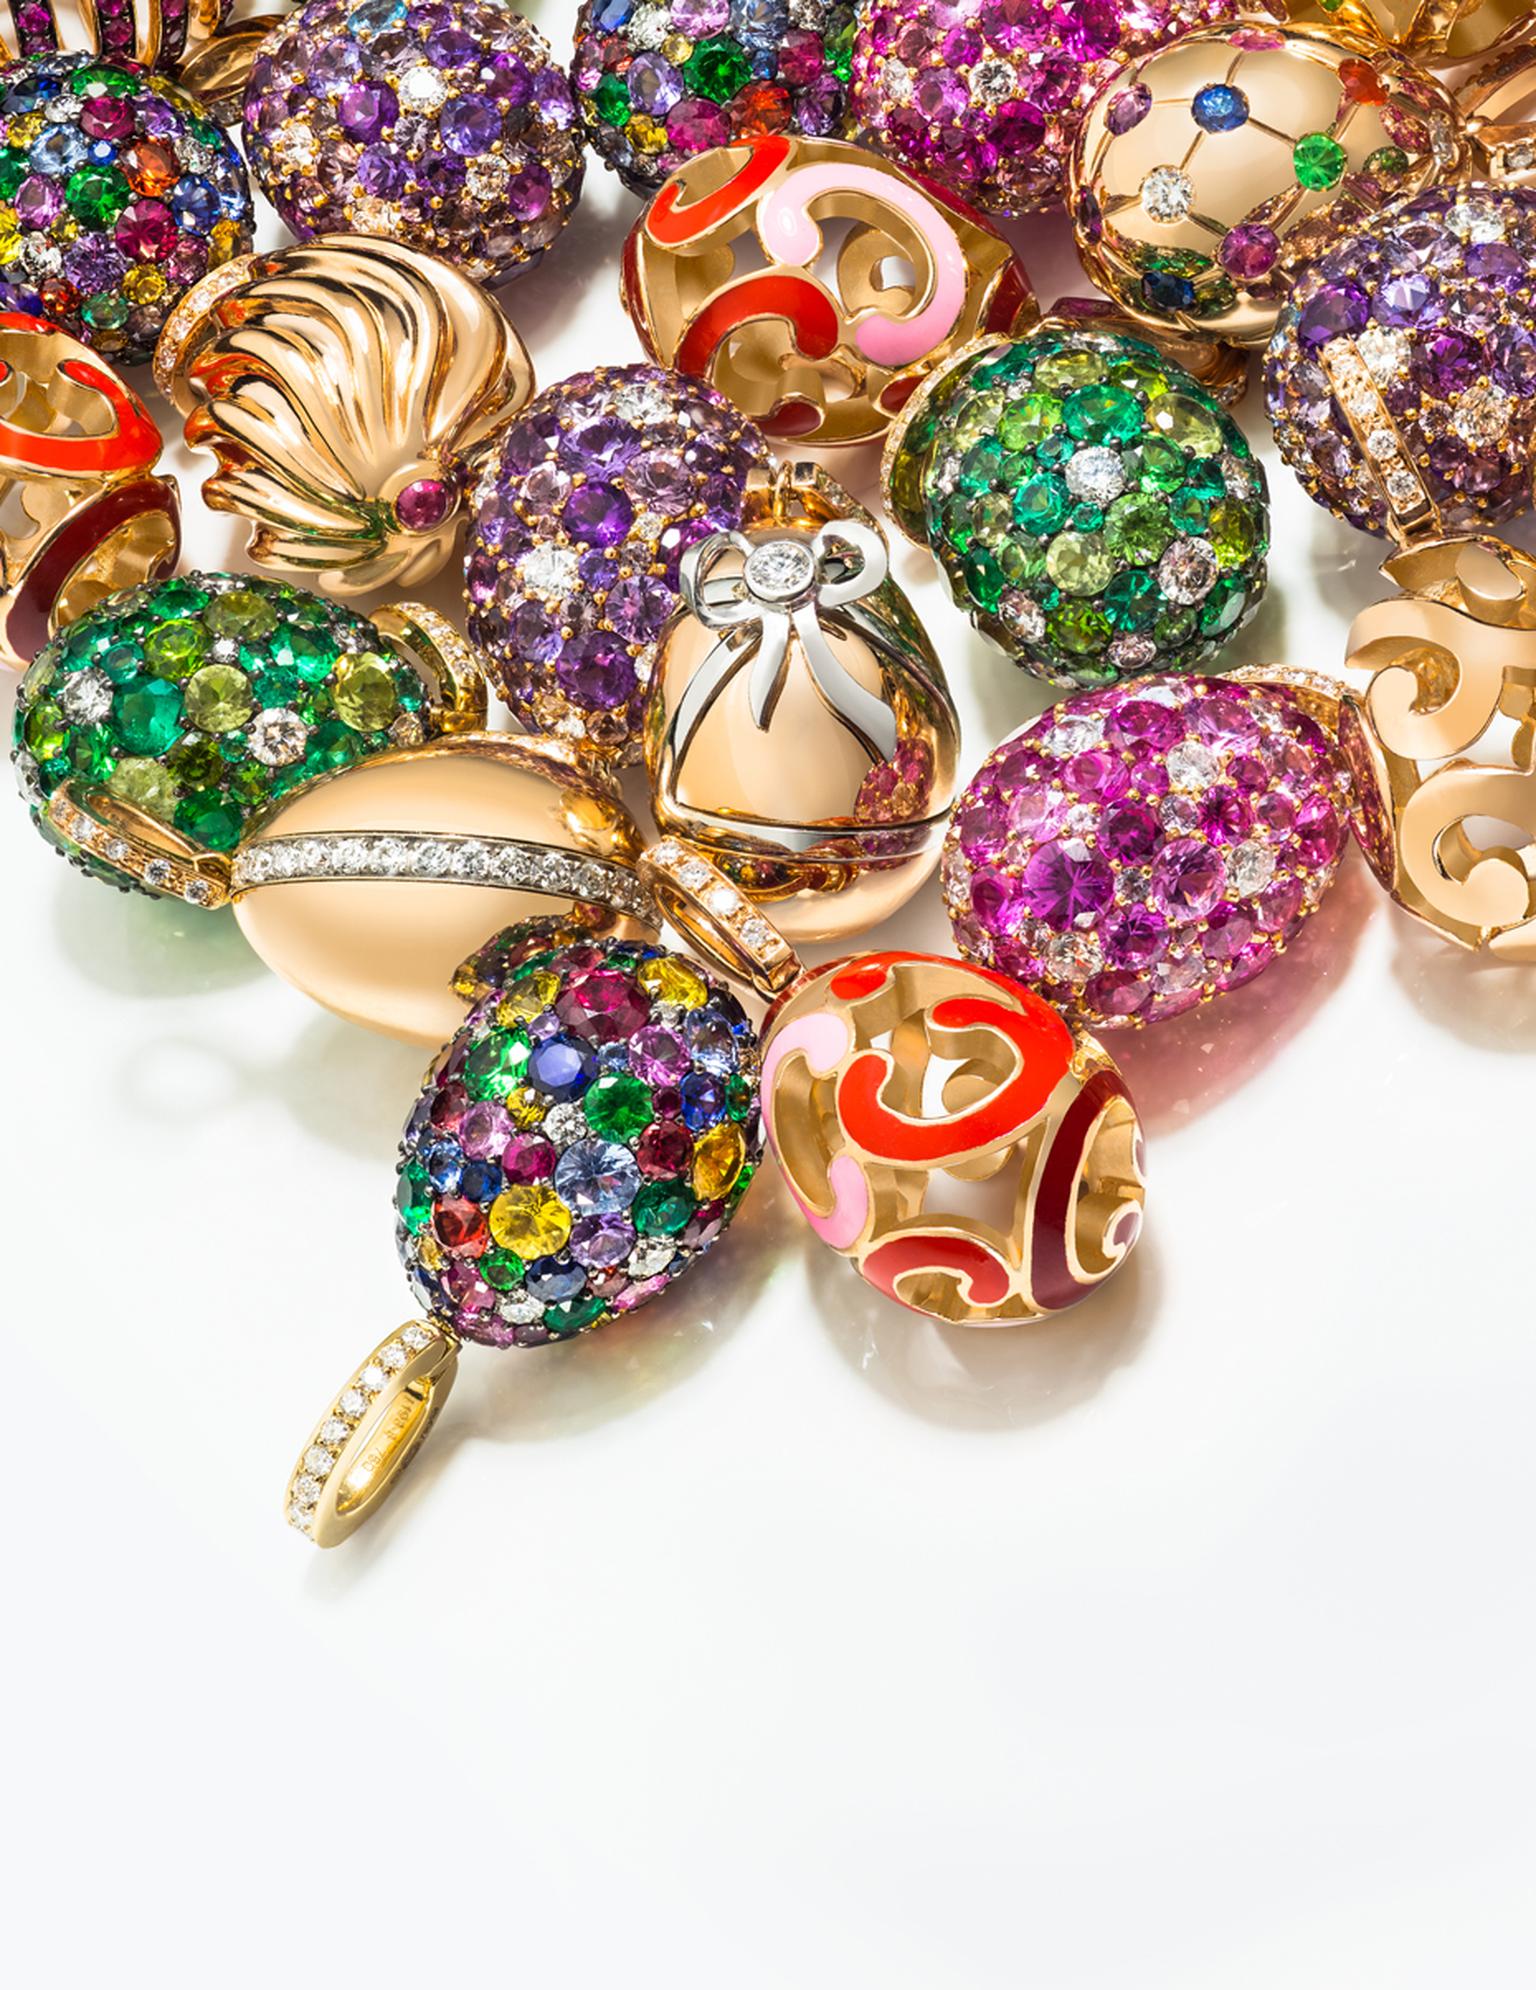 Fabergé's playful new Egg Charms, which can be fastened to a bracelet or worn on a chain around the neck, are punctuated with candy-bright gemstones, deeply ridged golden swirls or lustrous enamel.